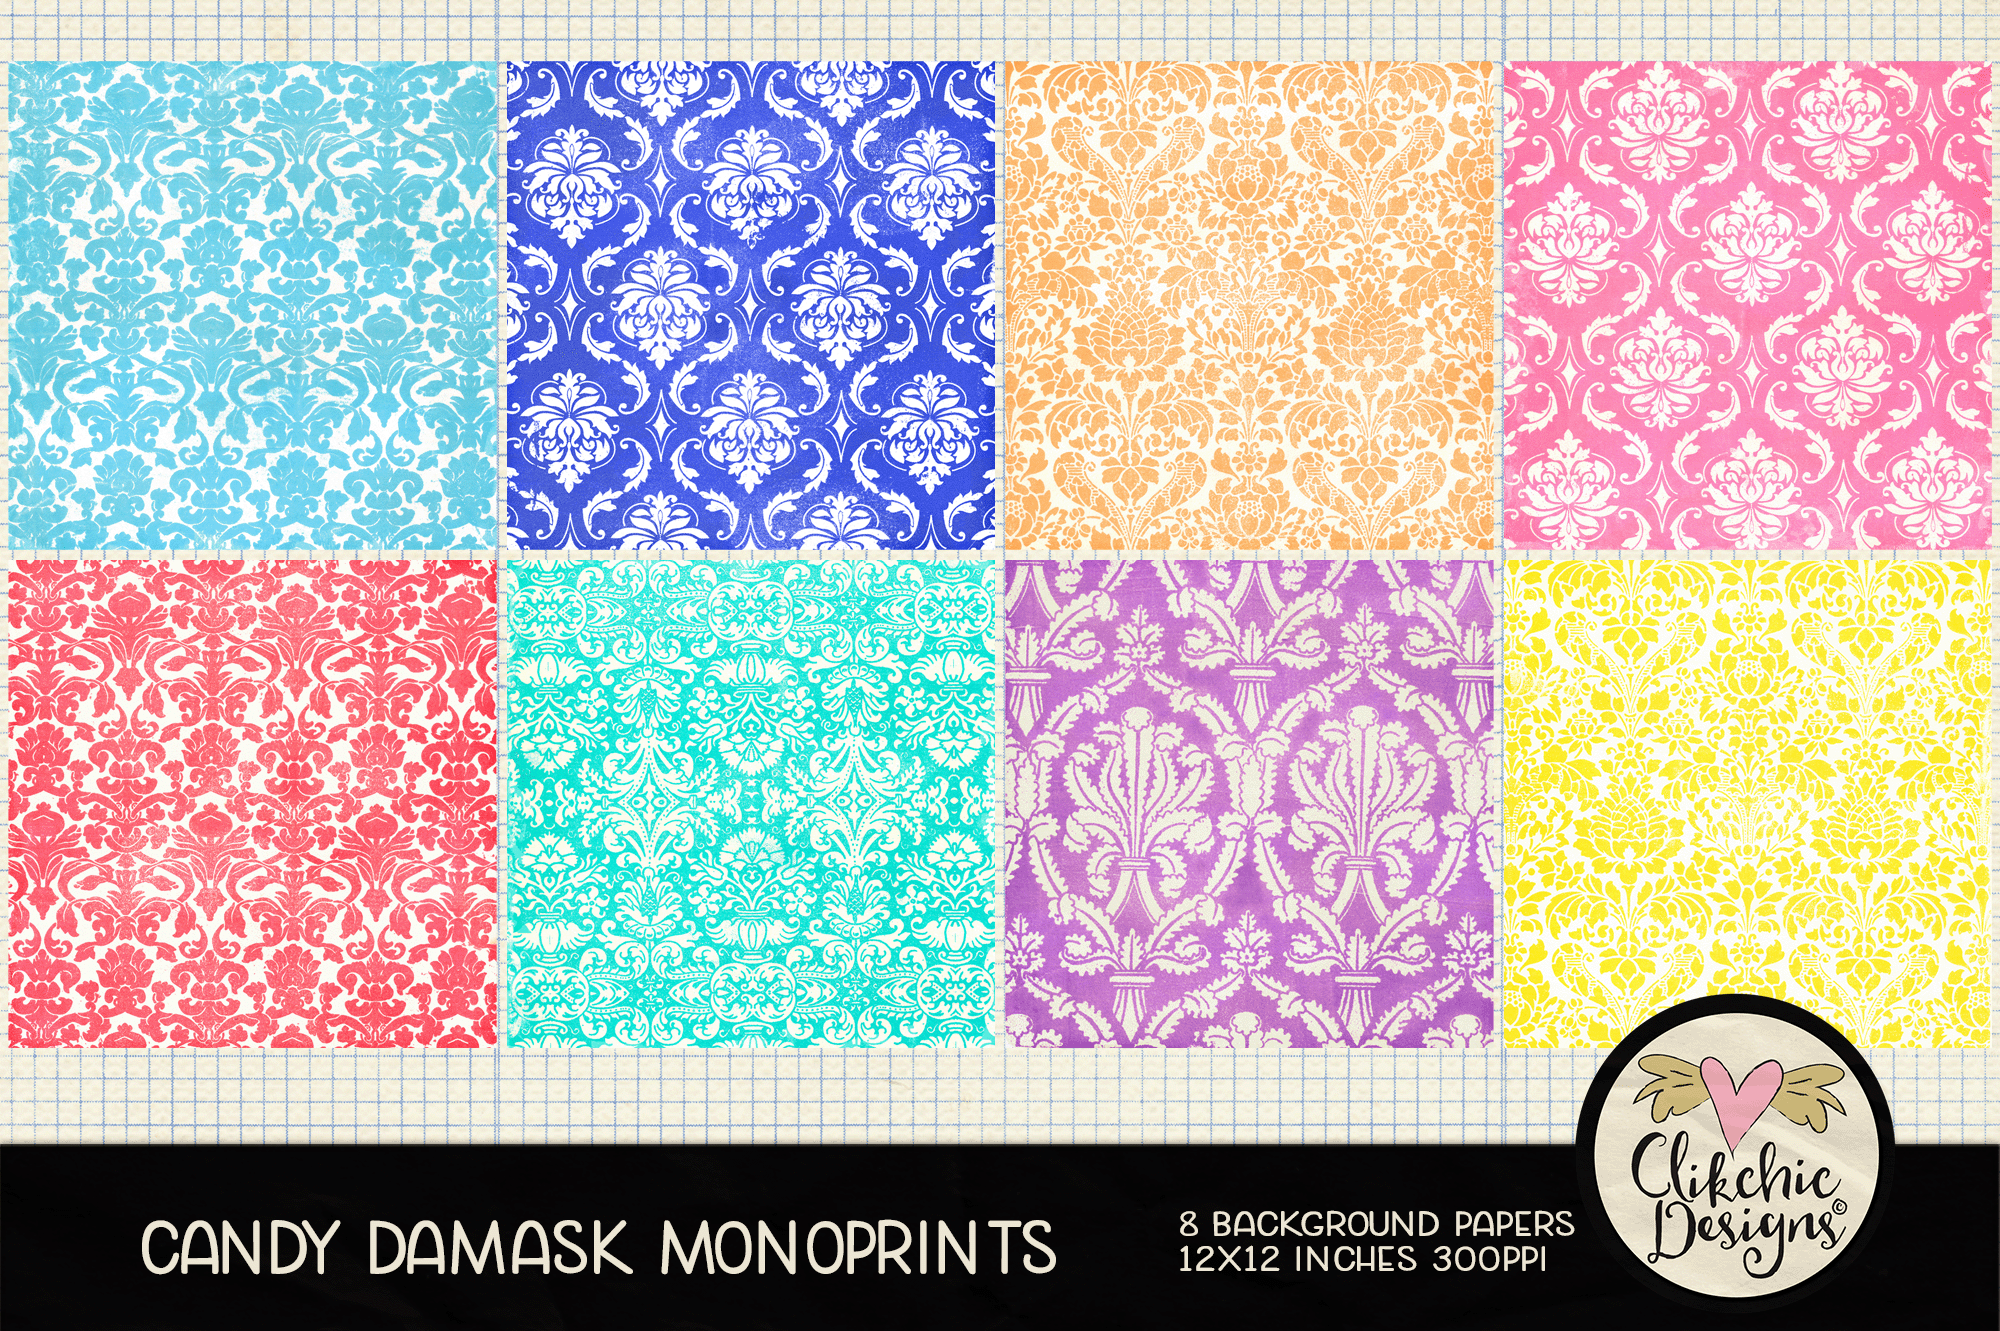 Candy Damask Monoprint Backgrounds by Clikchic Designs